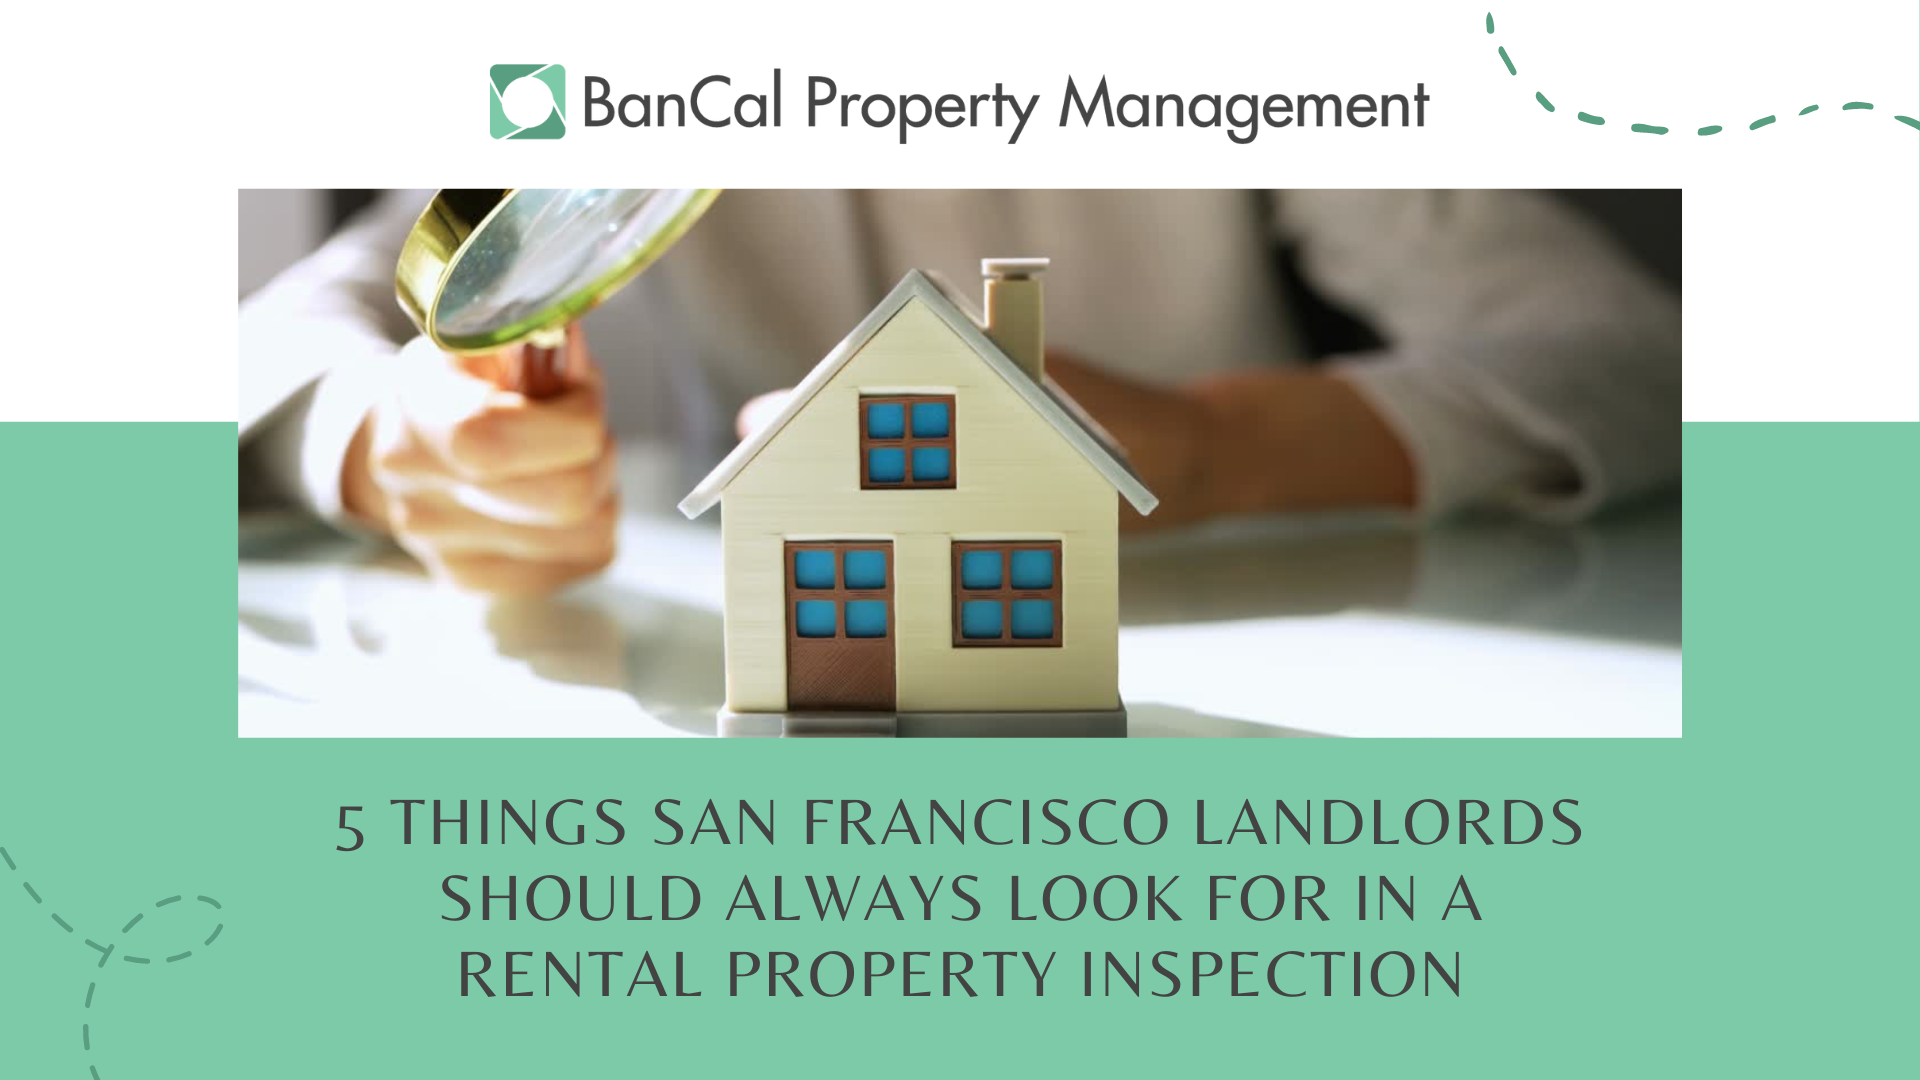 5 THINGS SAN FRANCISCO LANDLORDS SHOULD ALWAYS LOOK FOR IN A RENTAL PROPERTY INSPECTION